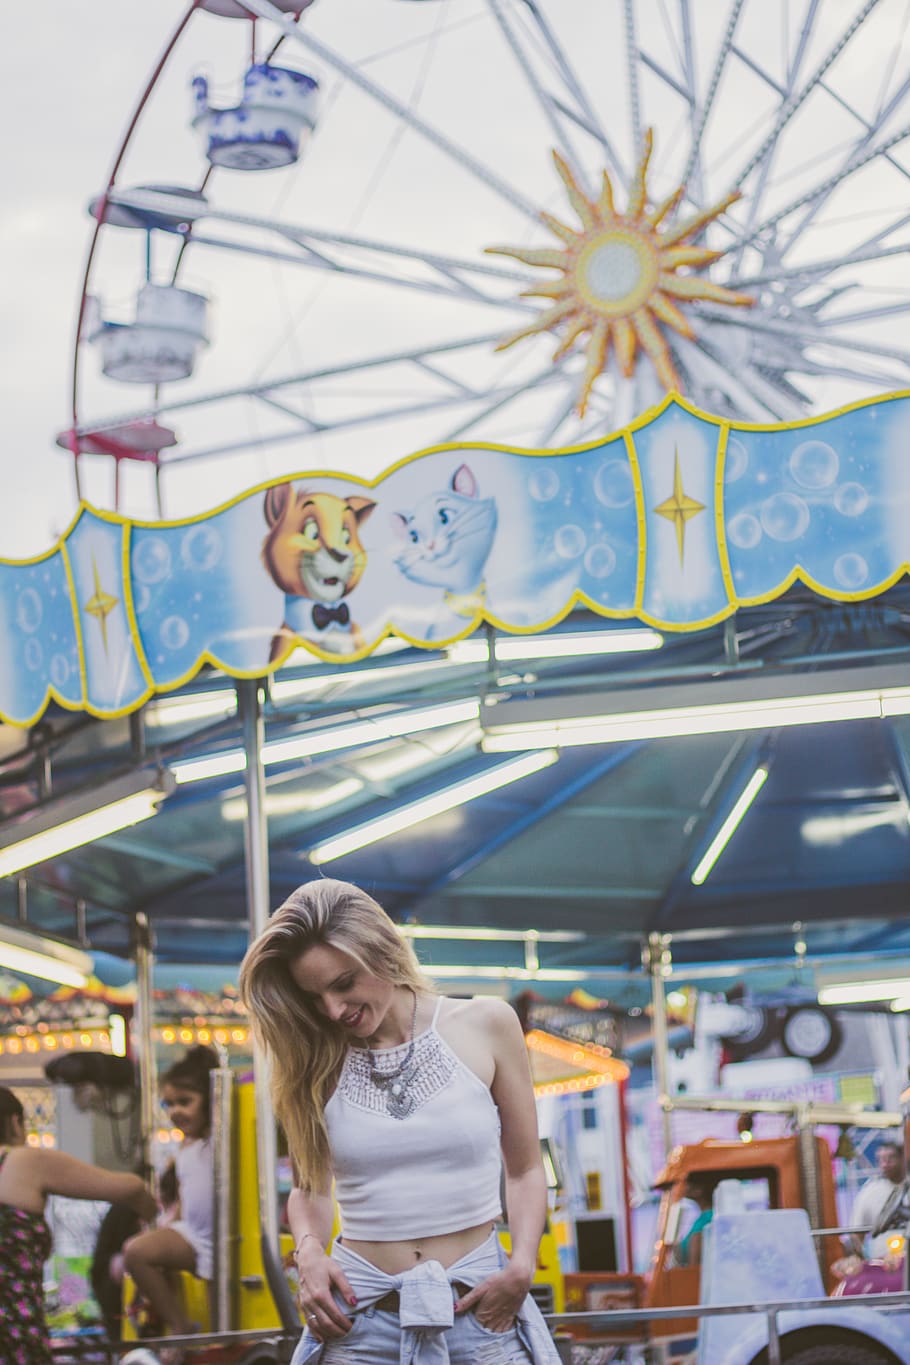 HD wallpaper: Woman In White Crop, carnival, person, theme park, real ...